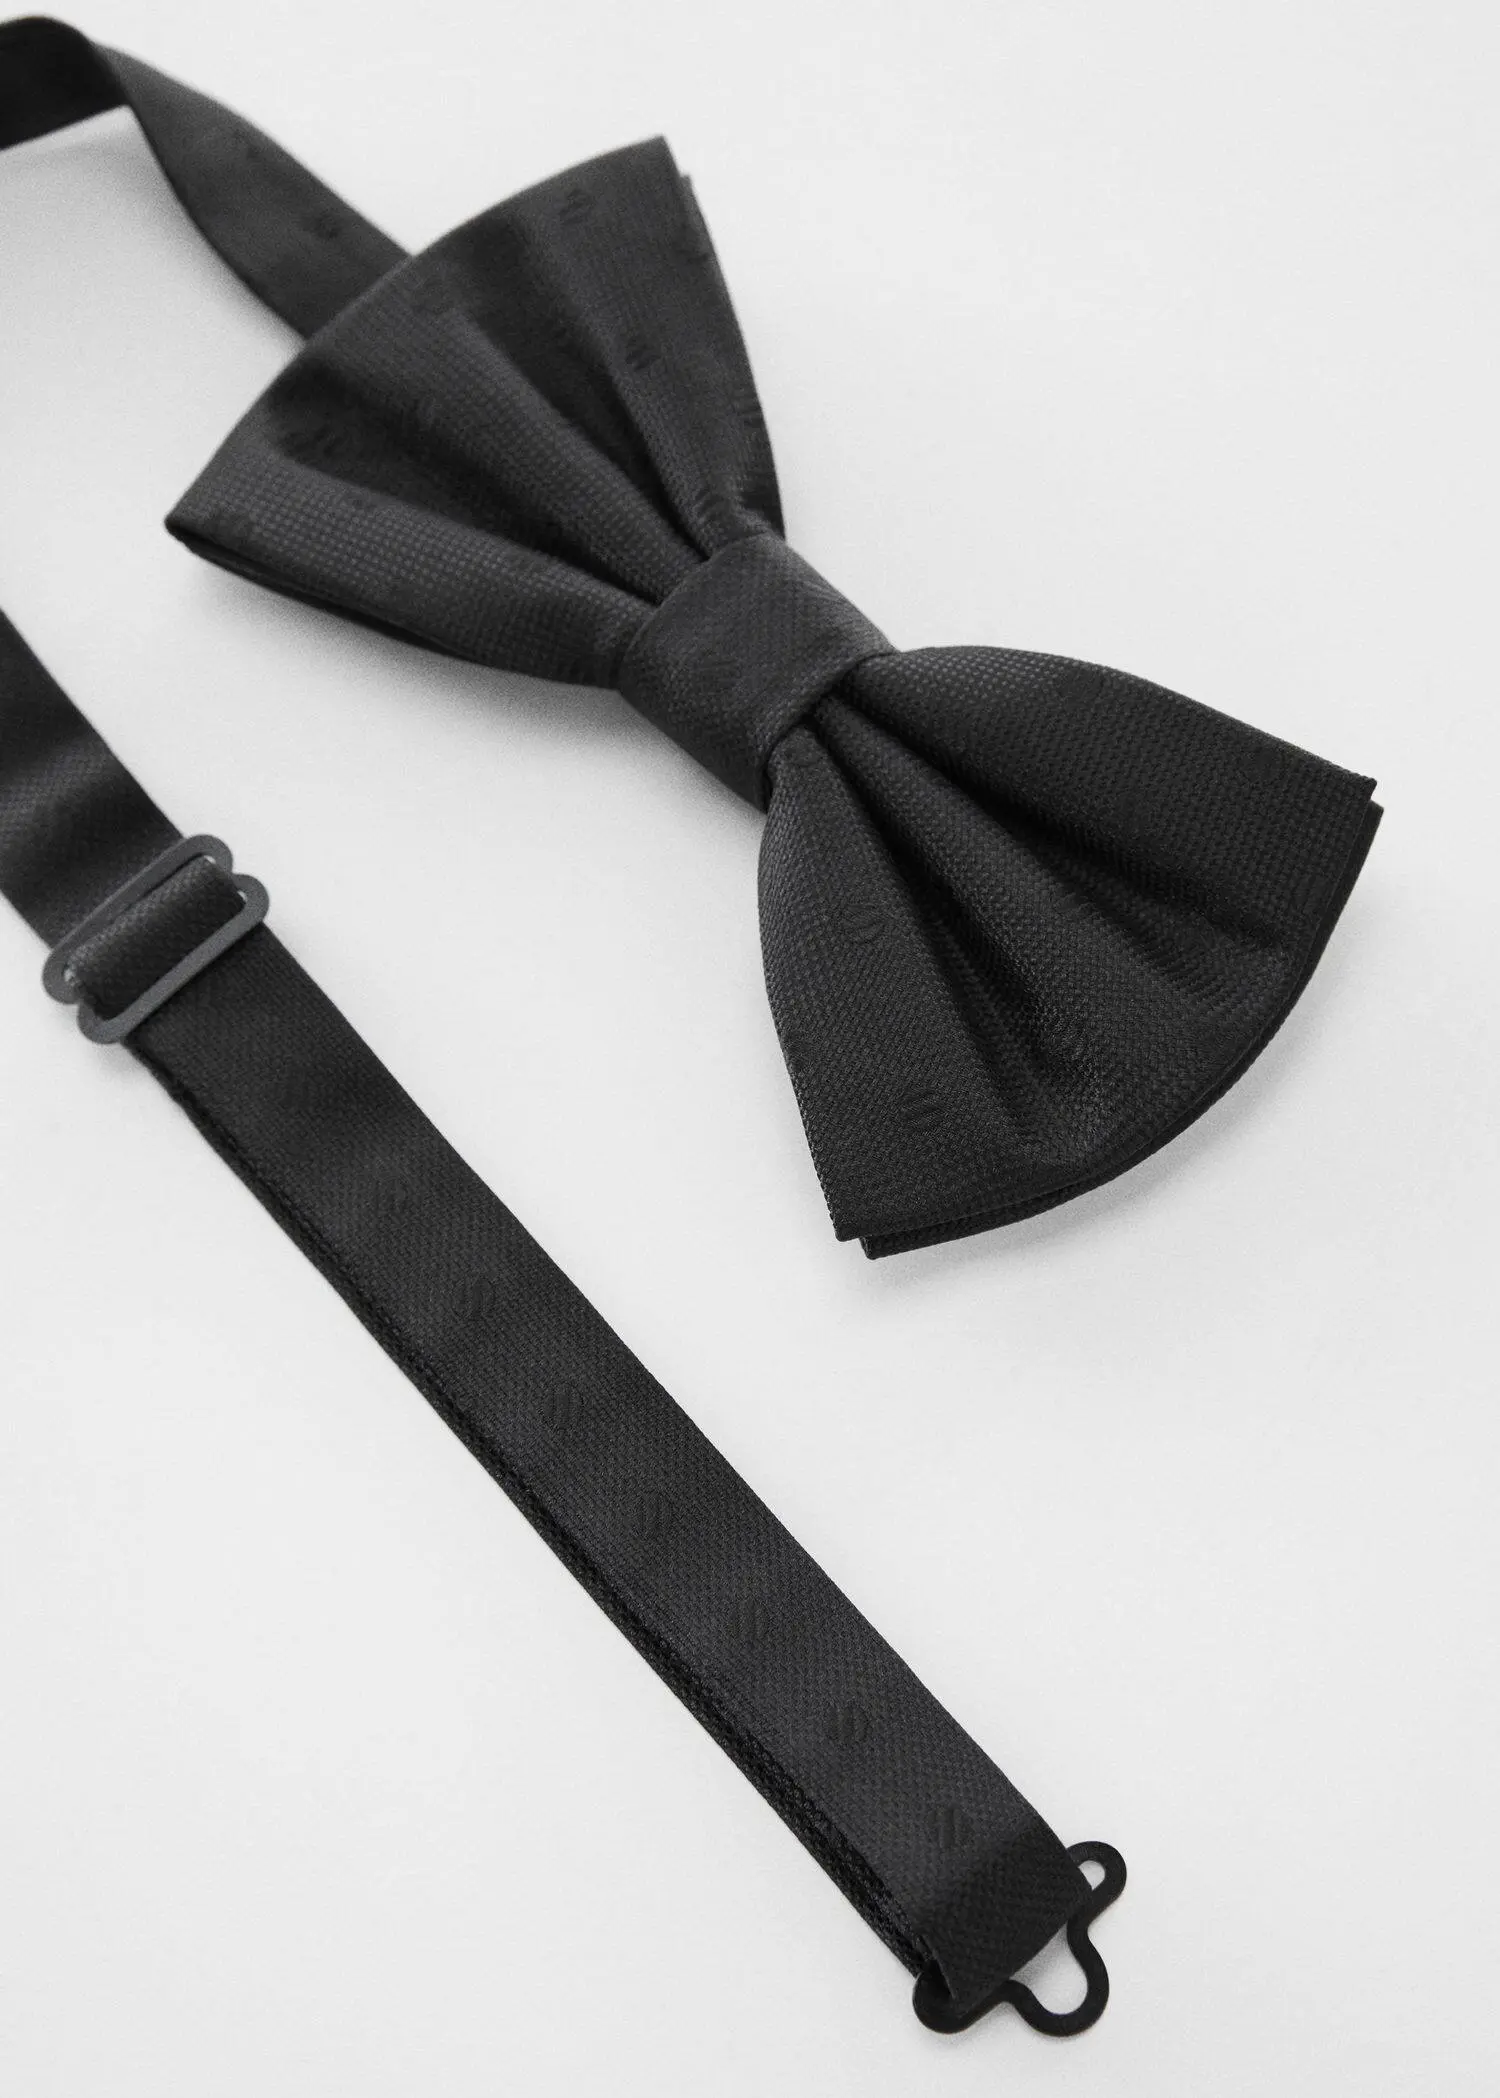 Mango Bow tie with polka-dot structure. a black bow tie next to a black suspenders. 